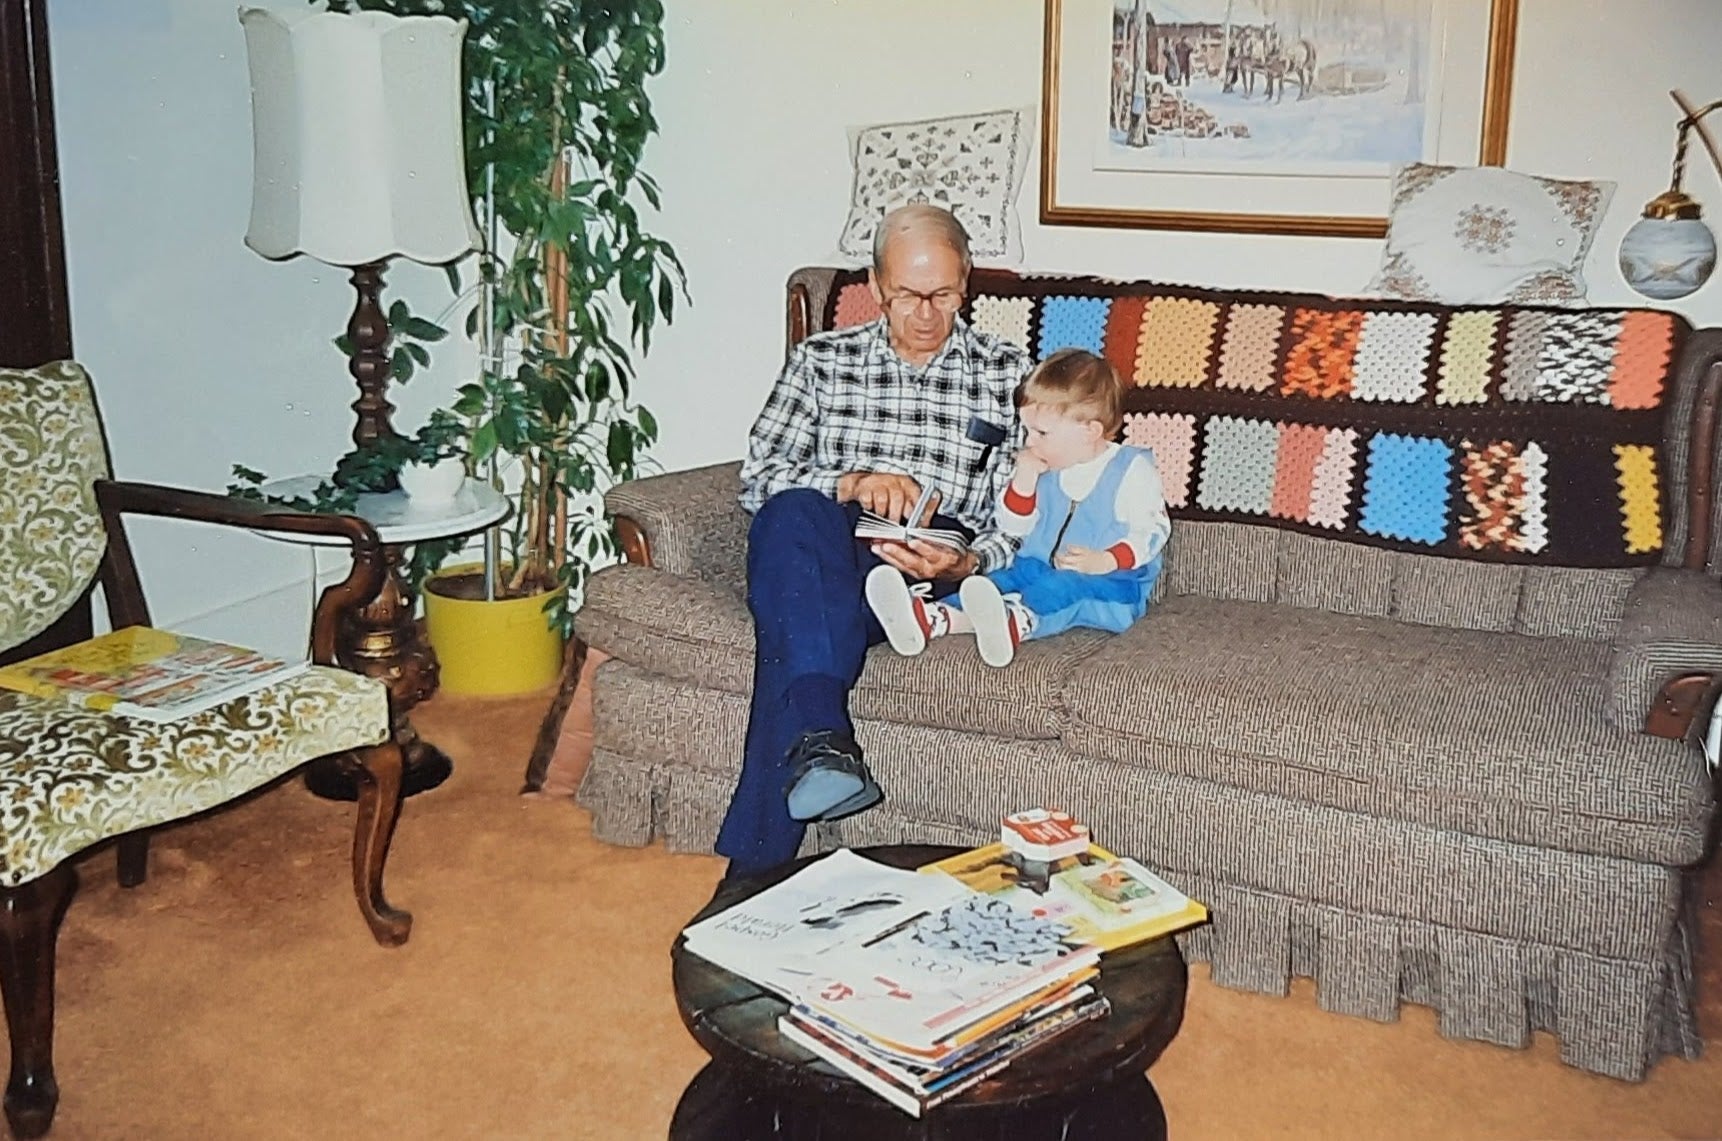 On a grey couch in a living room, Howard sits with a young child reading a cardboard book.